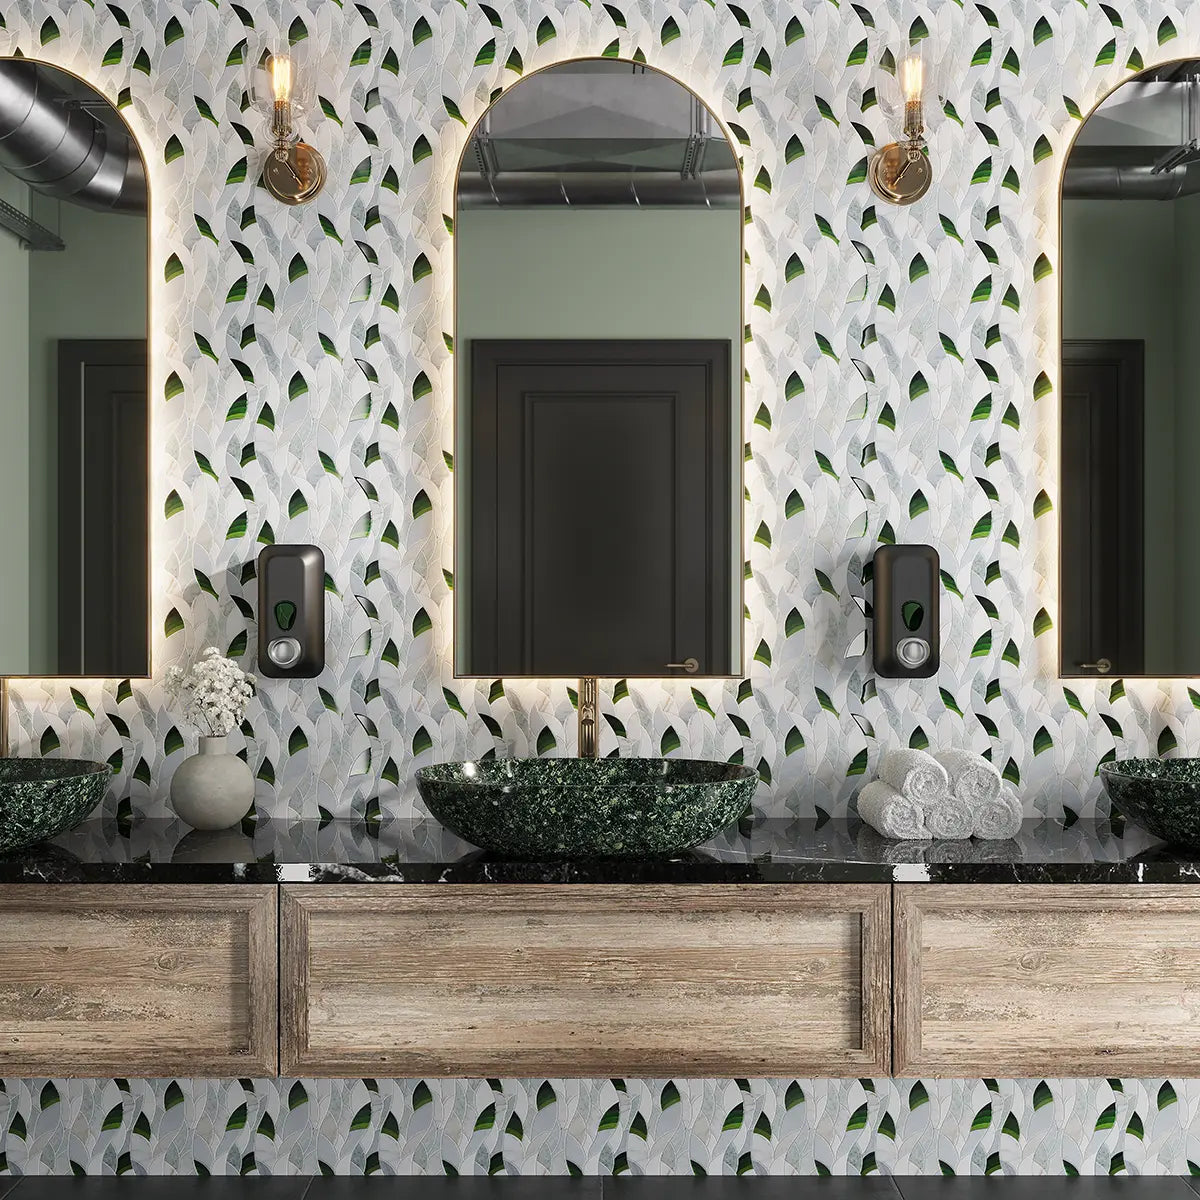 Botanical Waves Green Glass and Marble Mosaic Tile